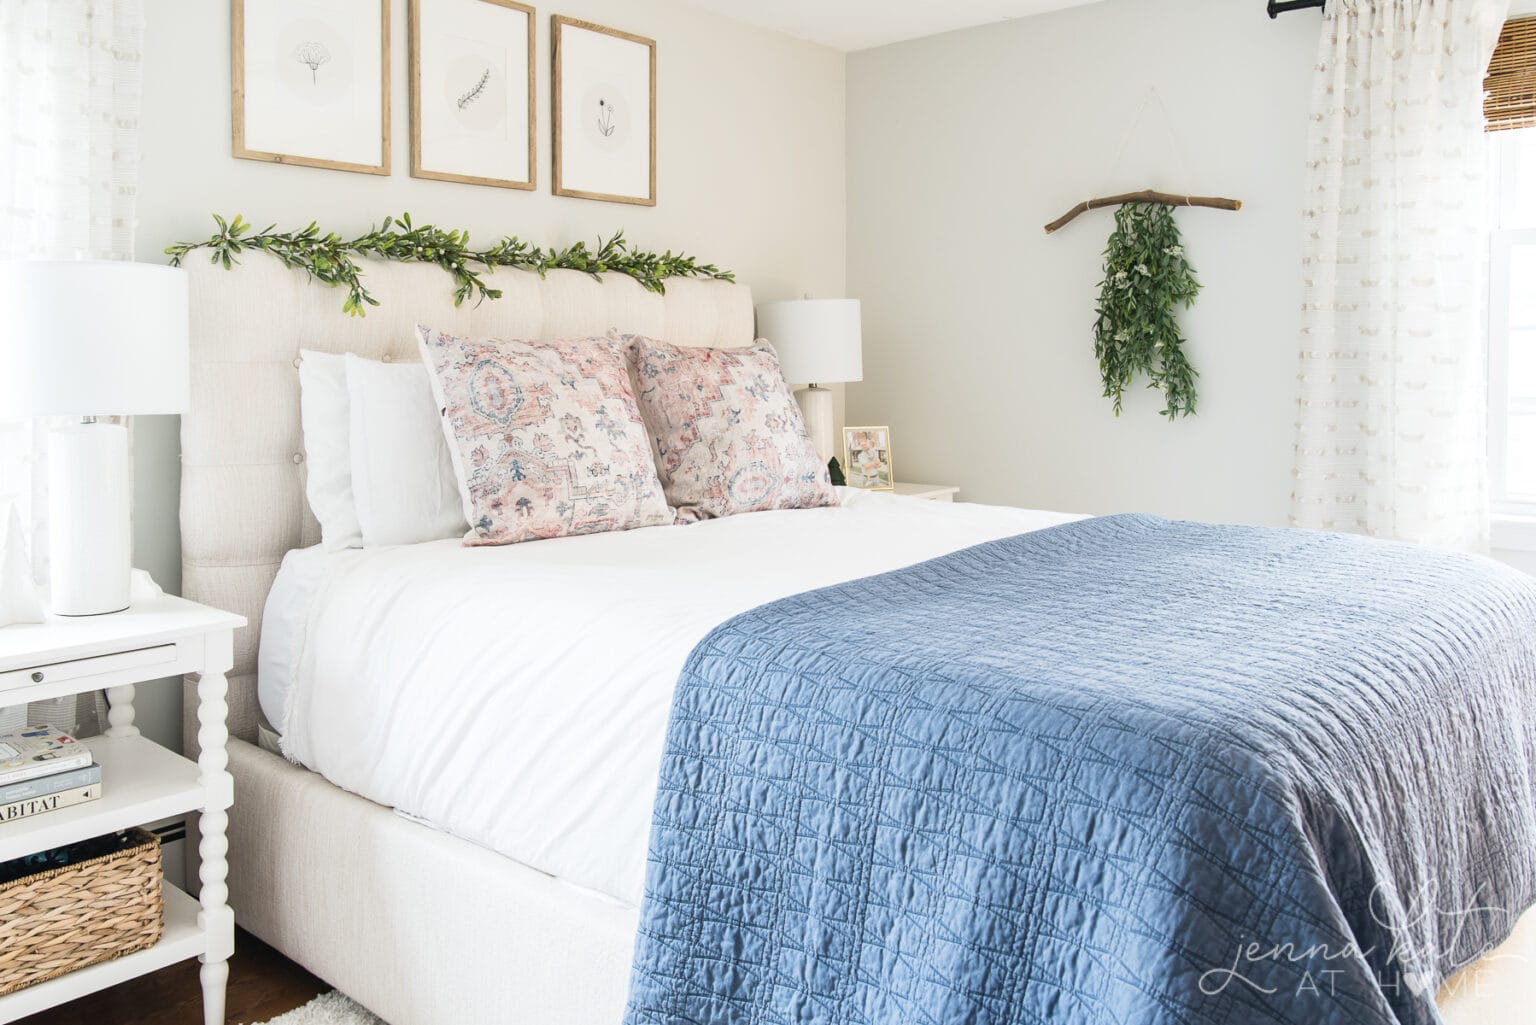 10 Christmas Bedroom Decorating Ideas You'll Love - Jenna Kate at Home